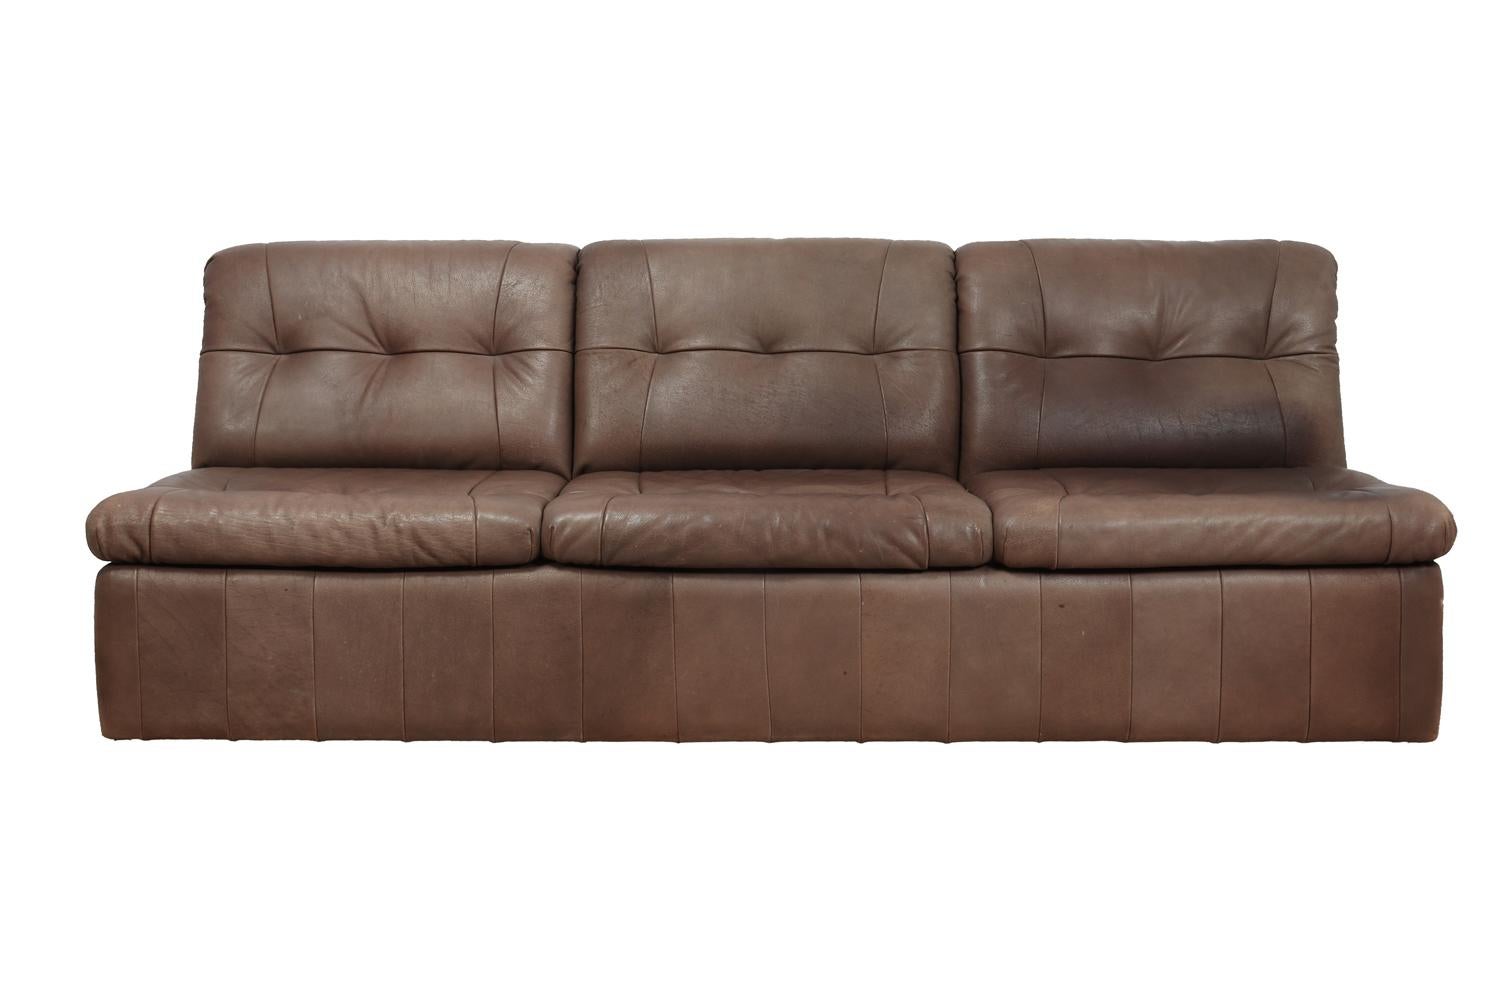 Danish leather modular suite three-seat, two-seat, one circa 1960
A Danish leather suite comprising of a three seat sofa, a two-seat sofa and a single chair, these also come with four cushions , the suite has very minimal wear no damage or old